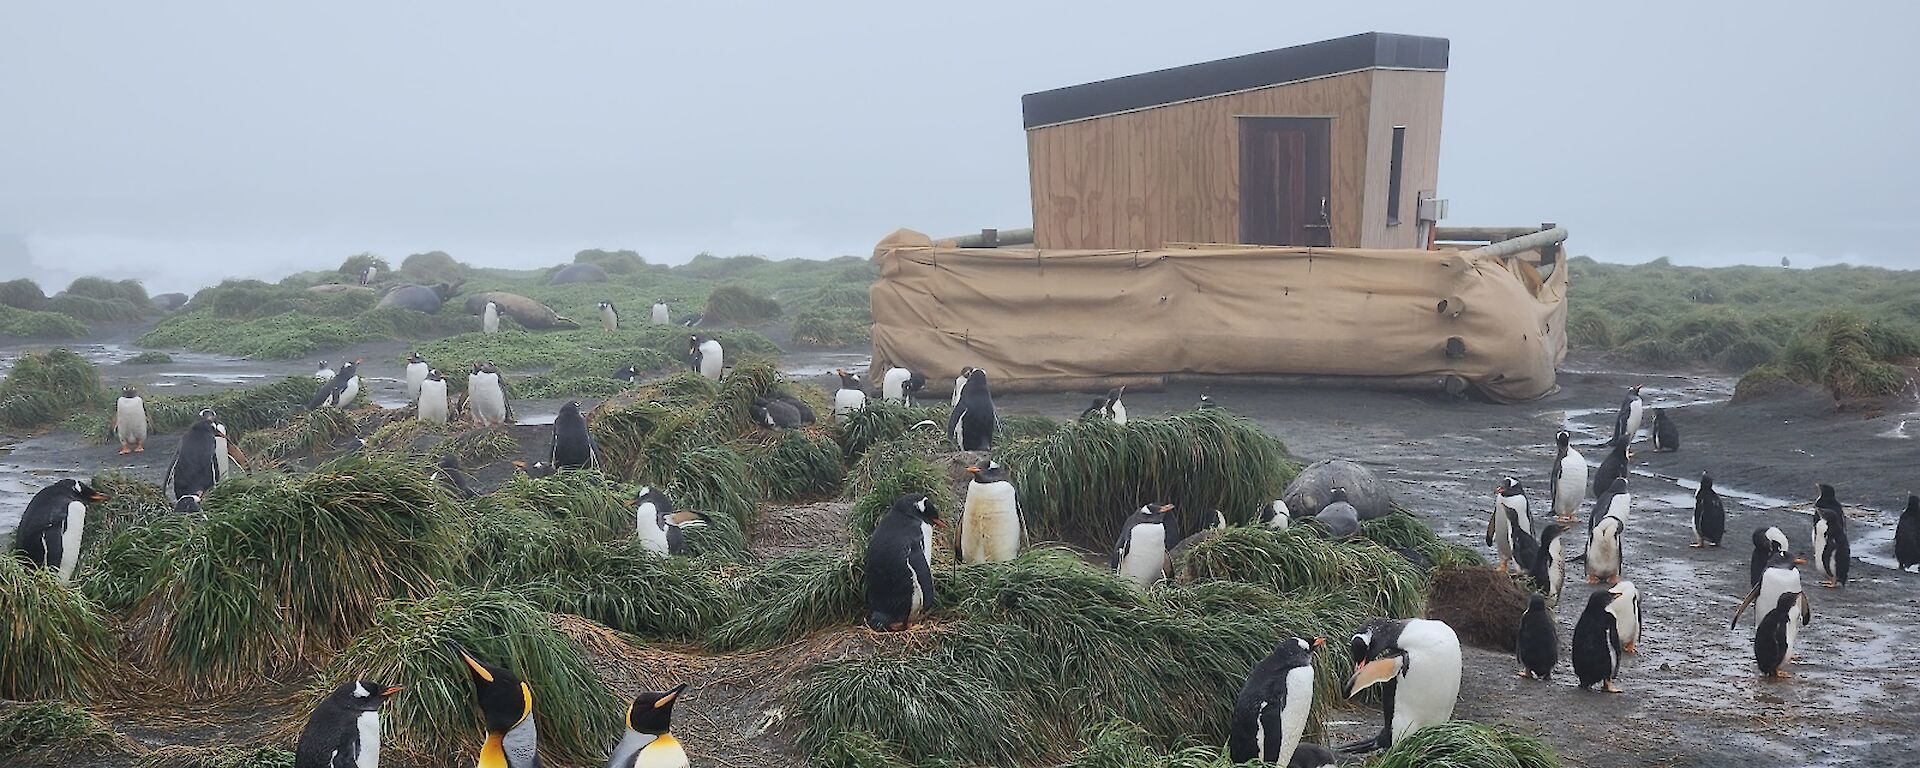 Penguins huddle amongst green tussocks of grass with a wooden hut in the background on a grey, wet day